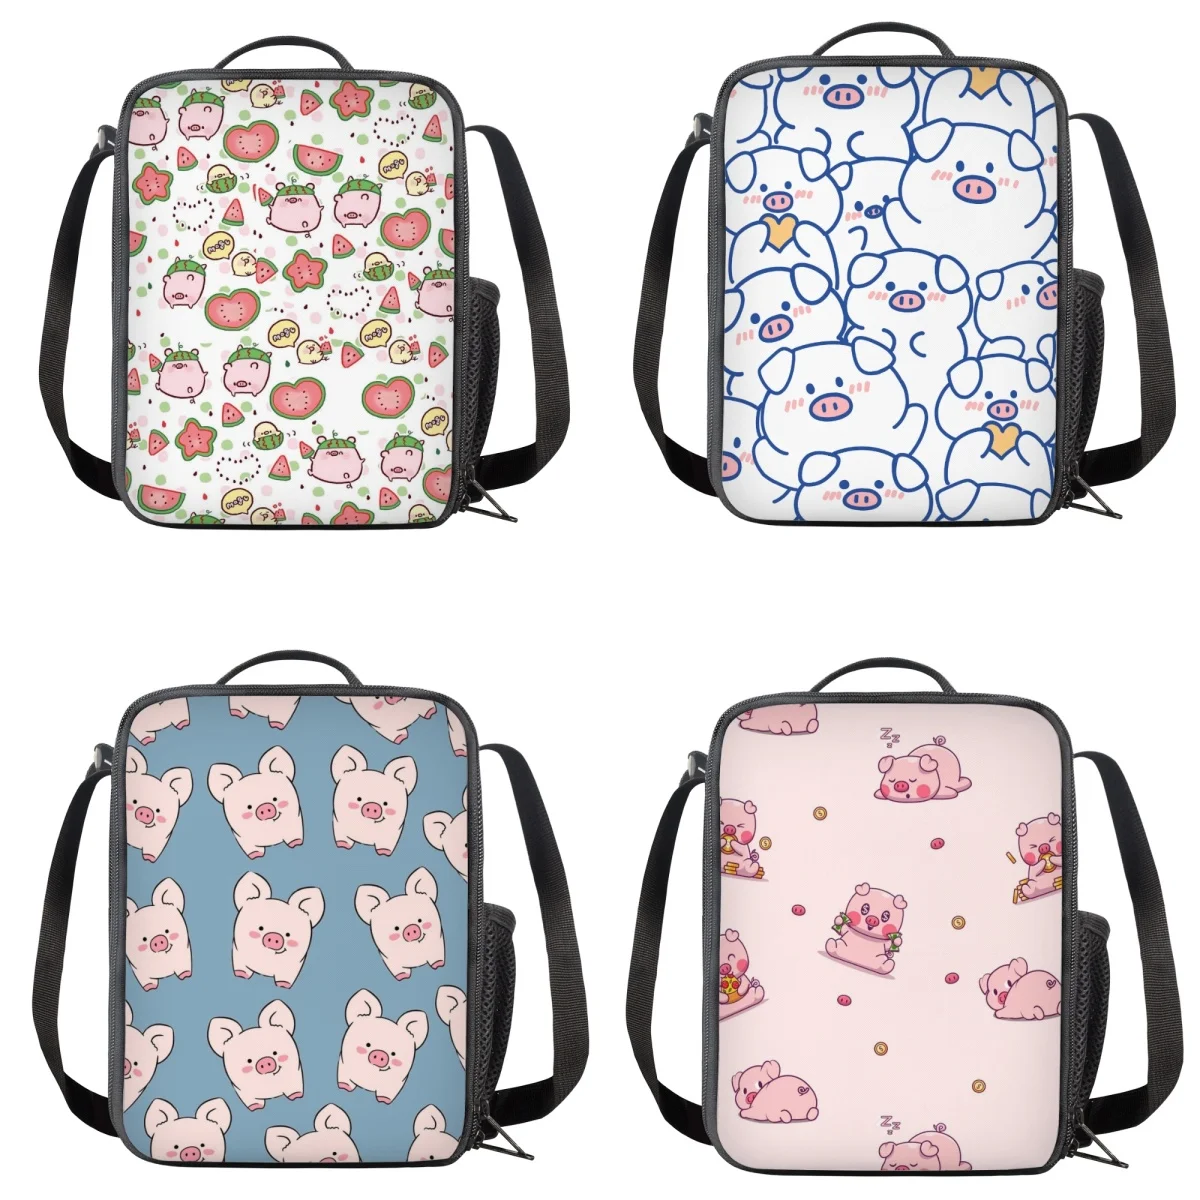 

Cartoon Pig Lunch Bag Customized for Men Women Lunchboxes with Shoulder Strap Teenagers Boys Girls School Thermal Insulated Box